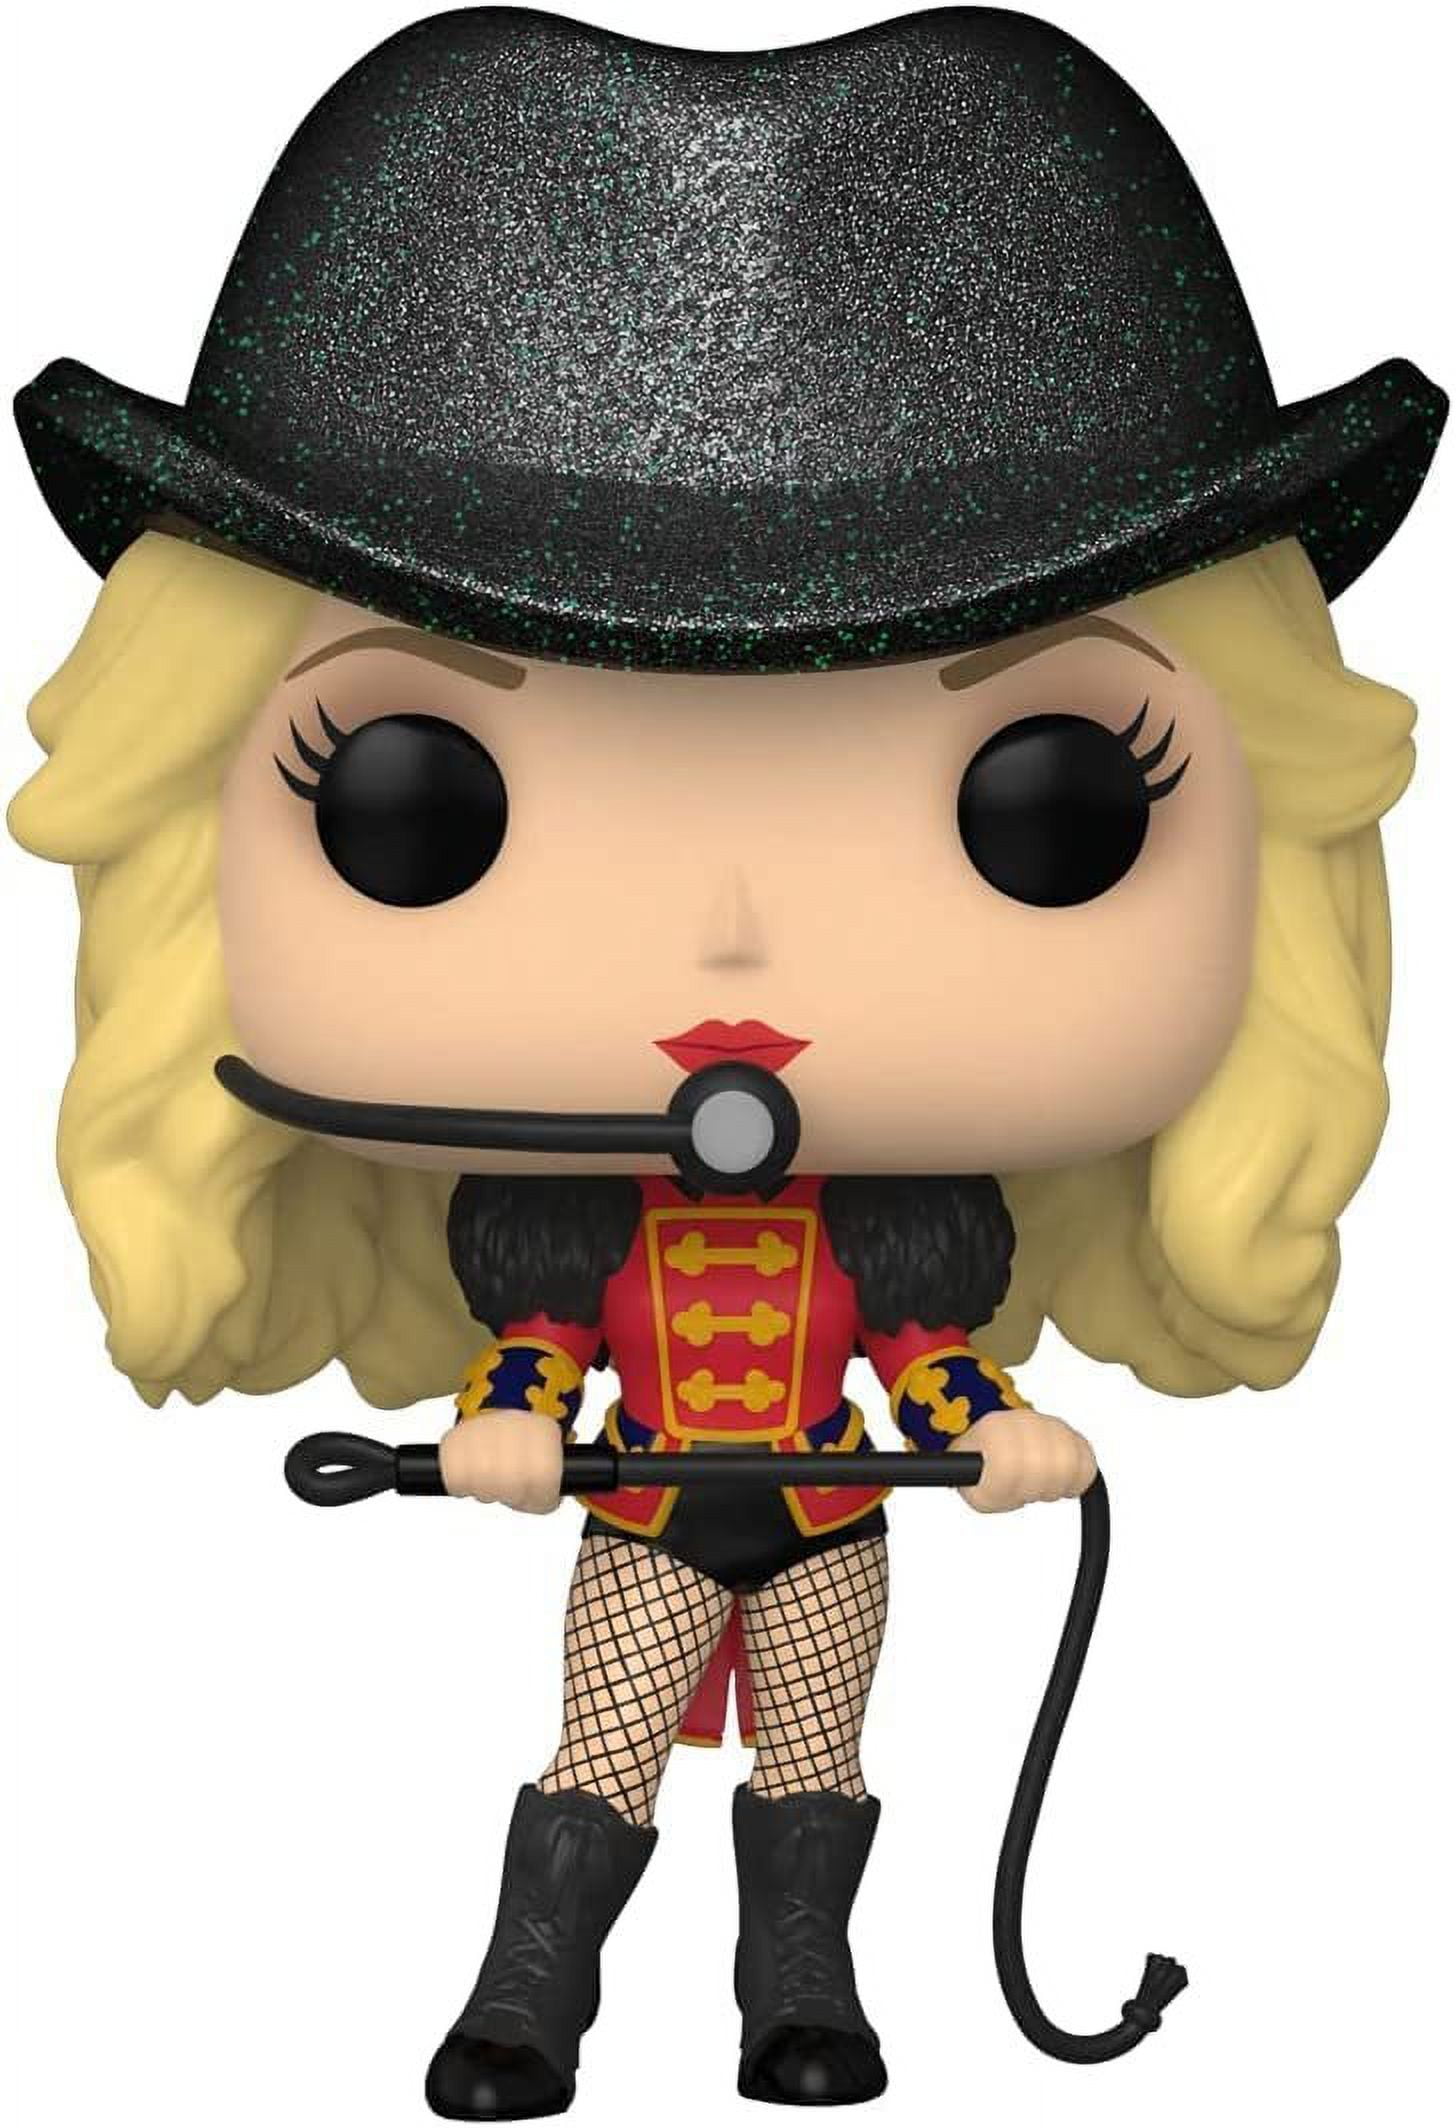 Funko POP! Rocks CHASE Britney Spears #262 [Circus, Ringleader with Hat]